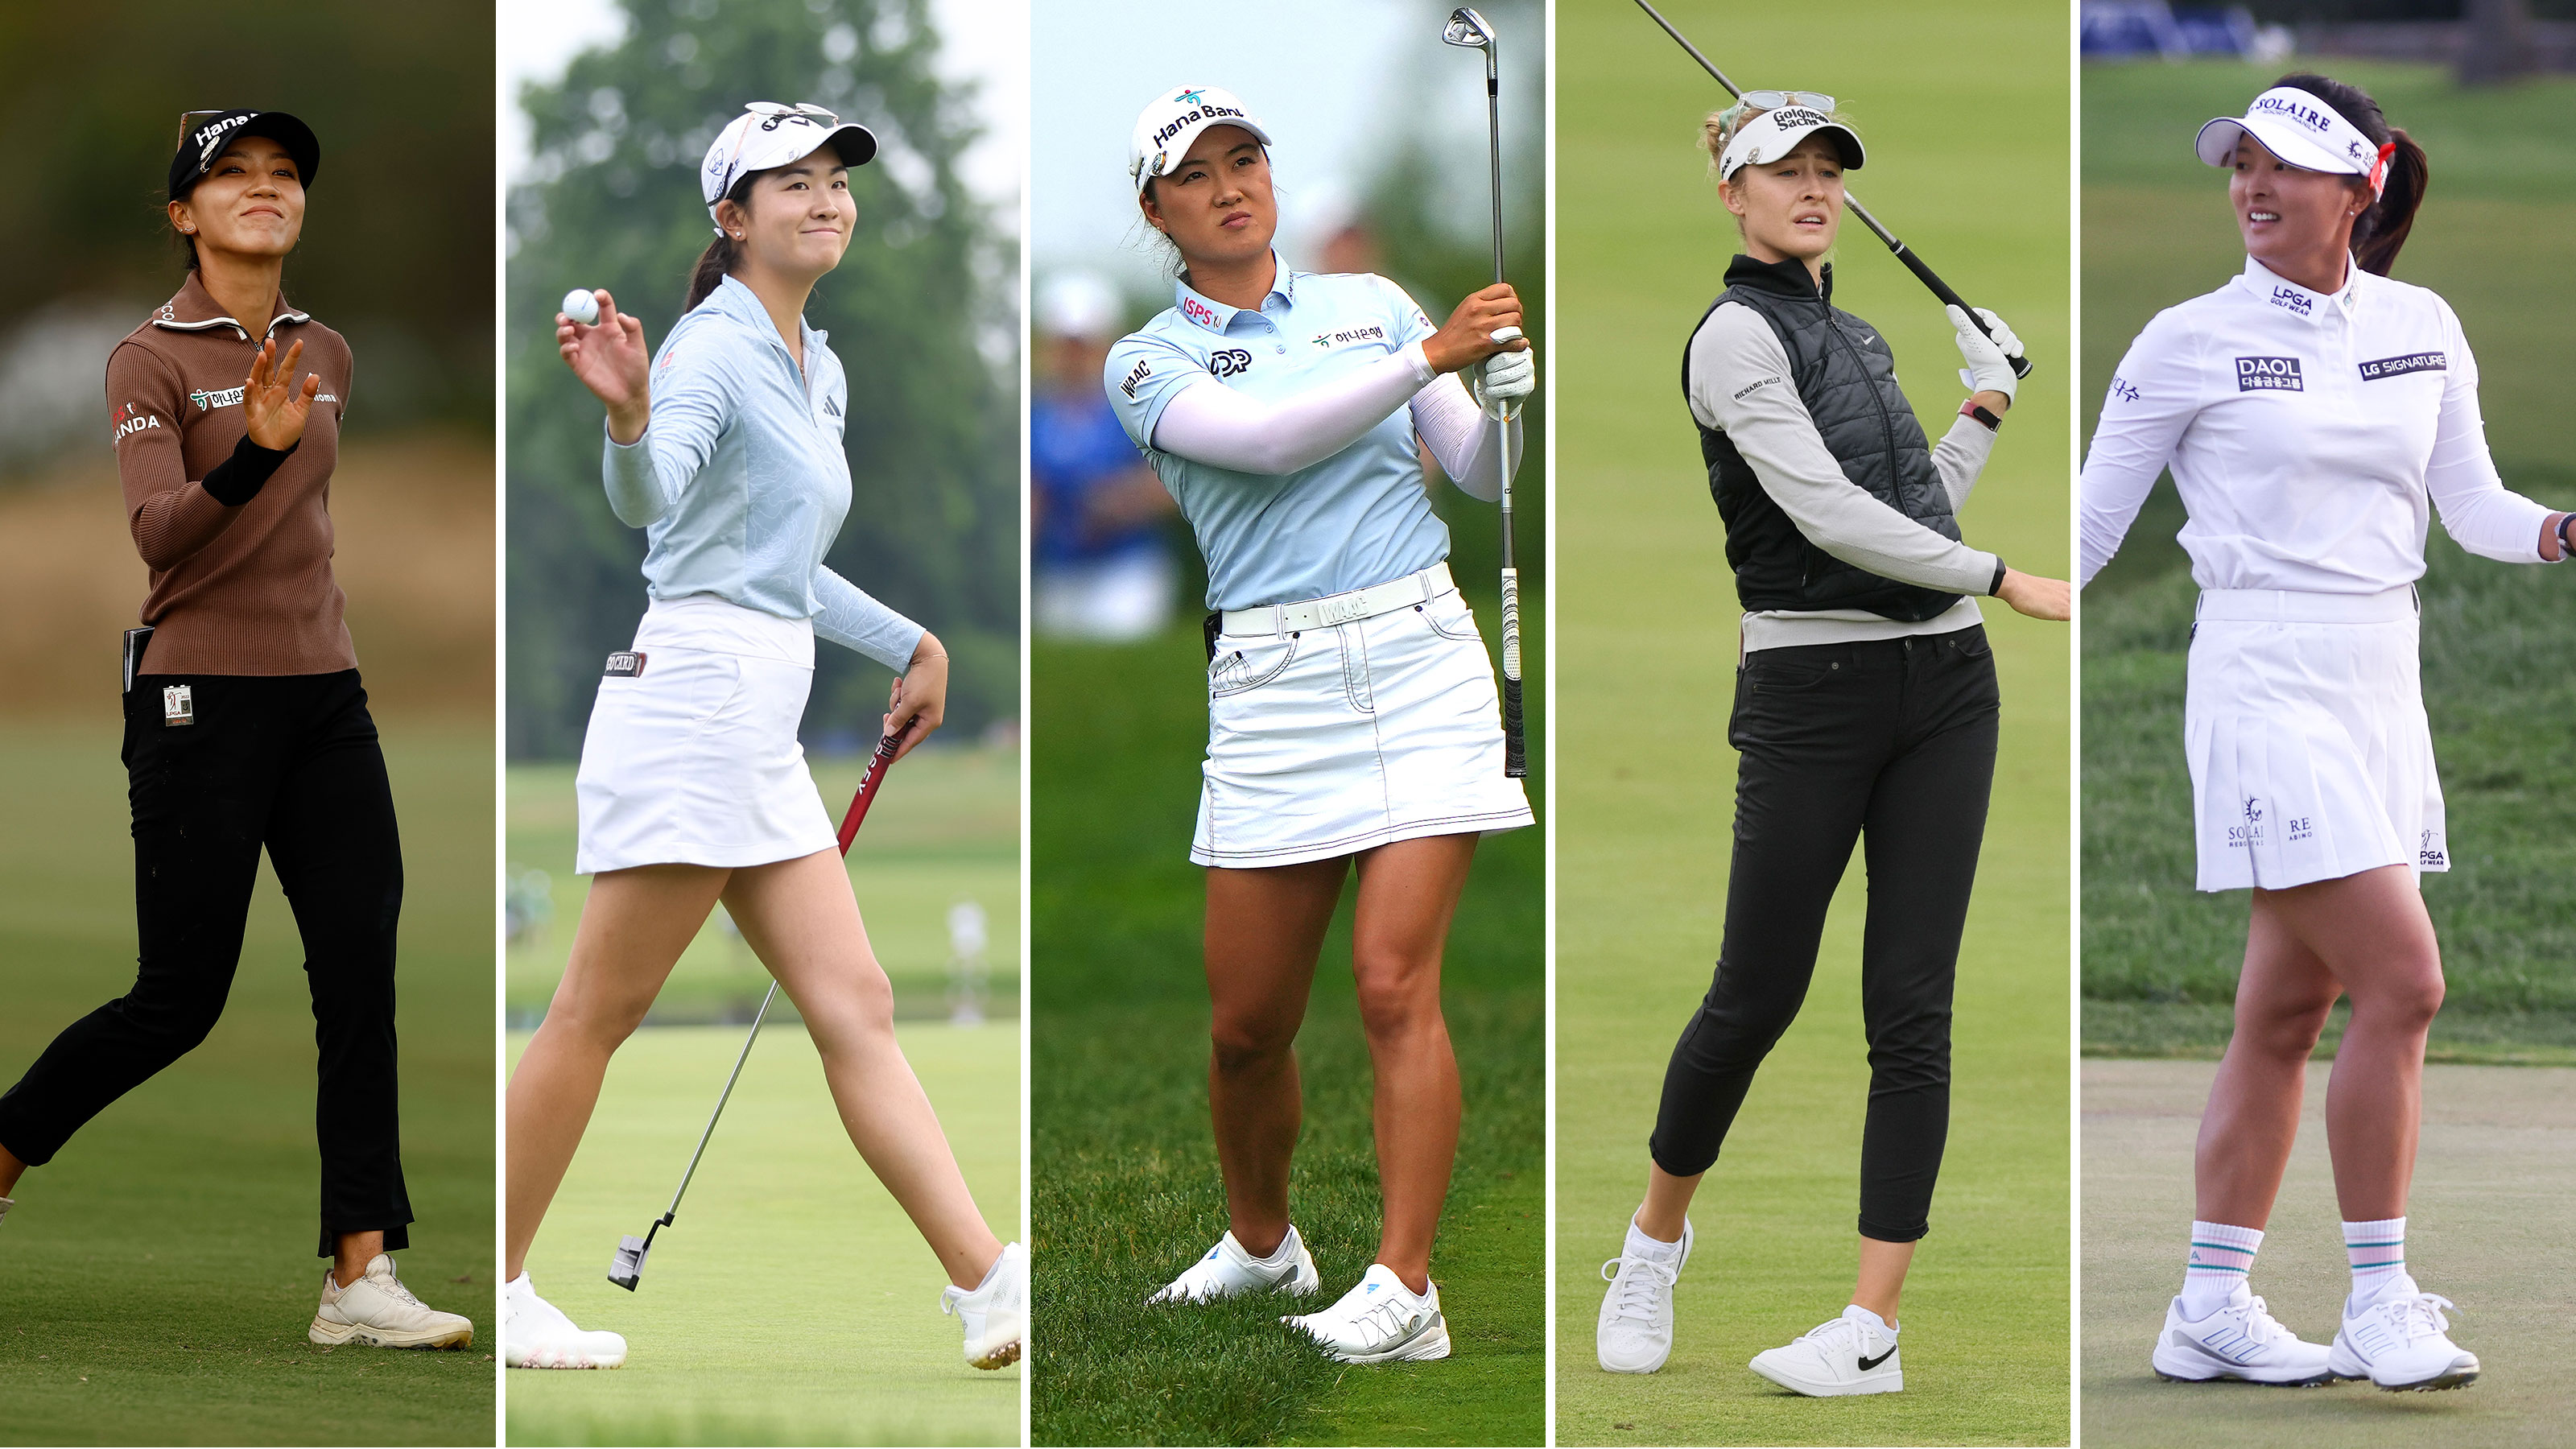 Us Womens Open 2023 Players Ranking Image Collage 